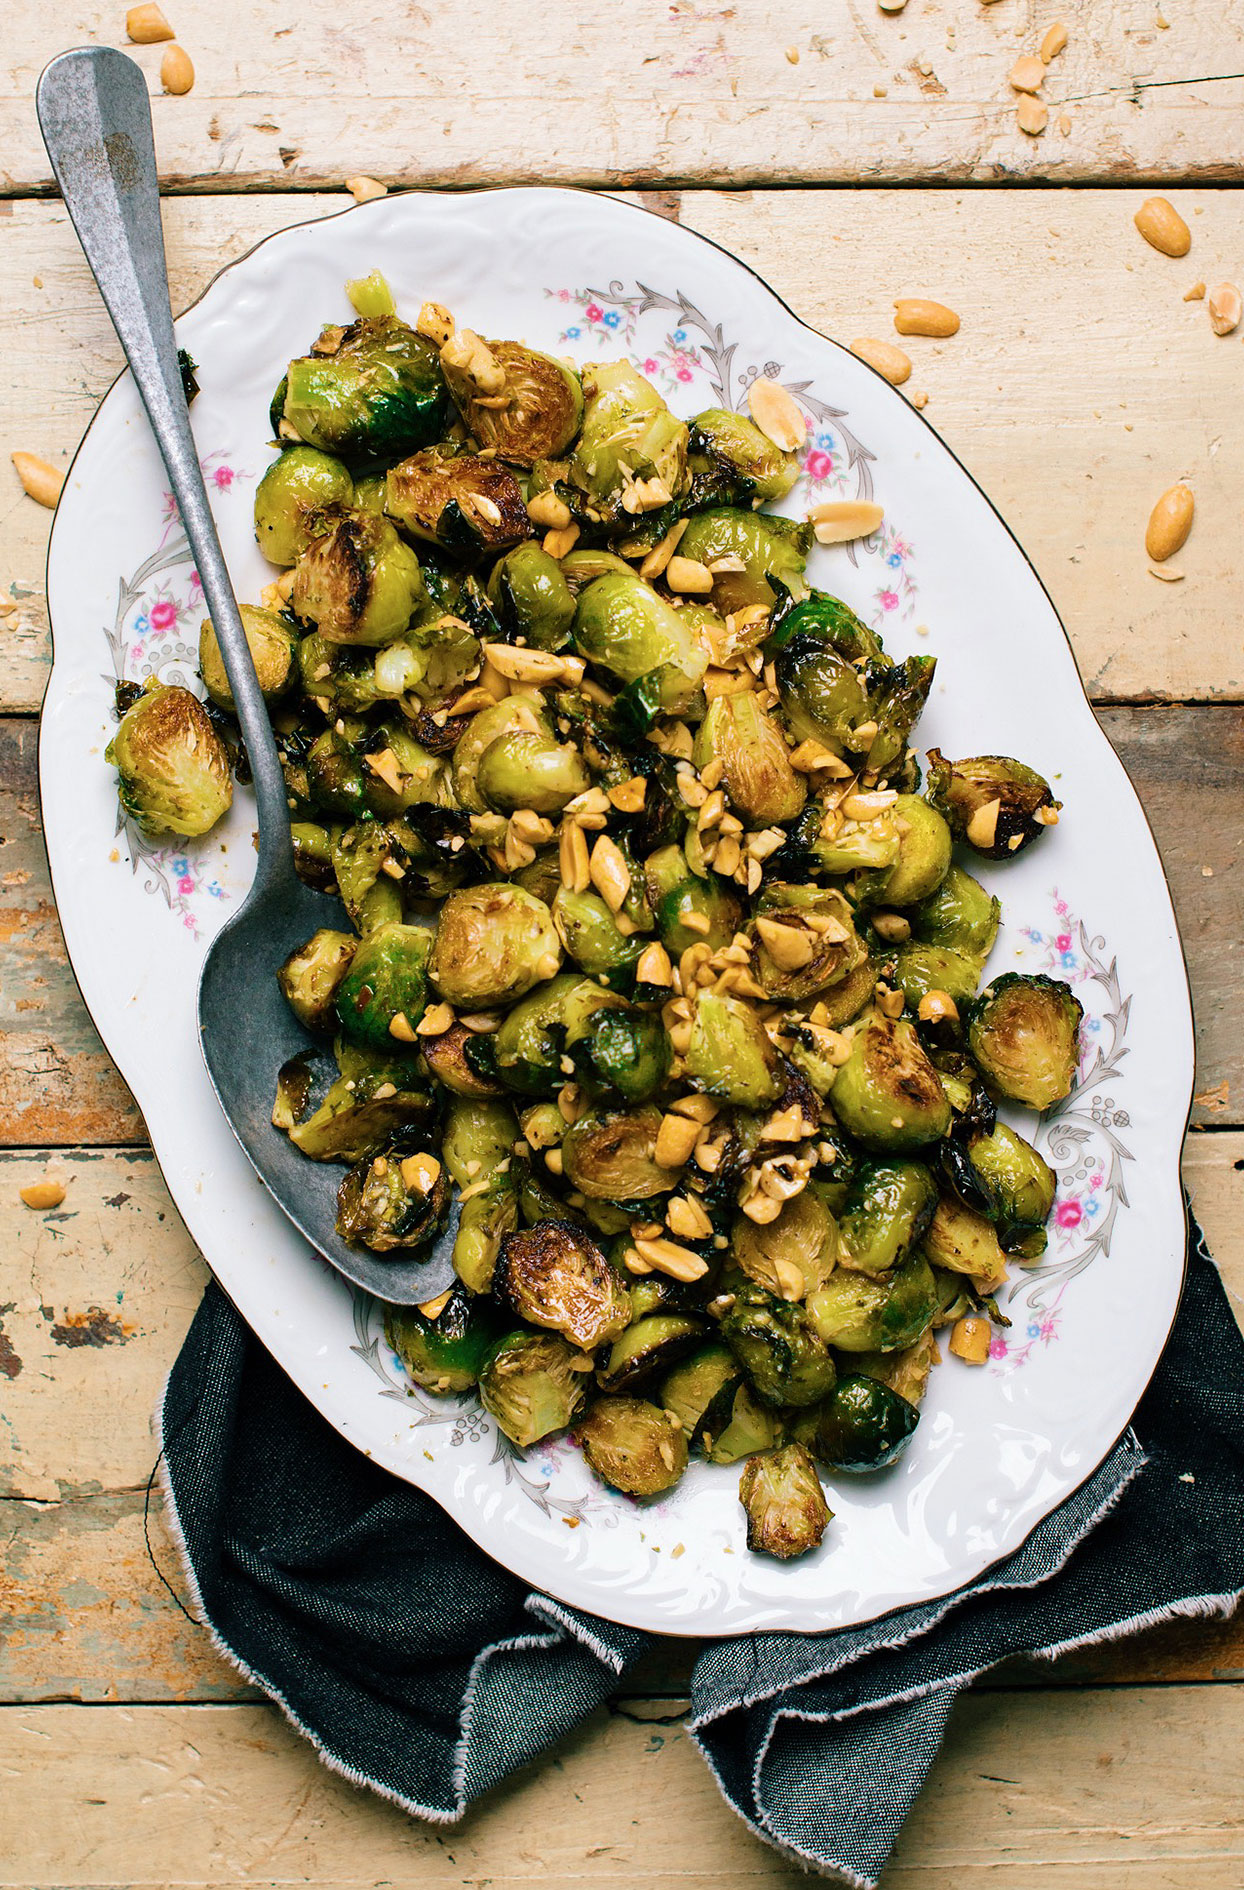 Crispy Brussel sprouts